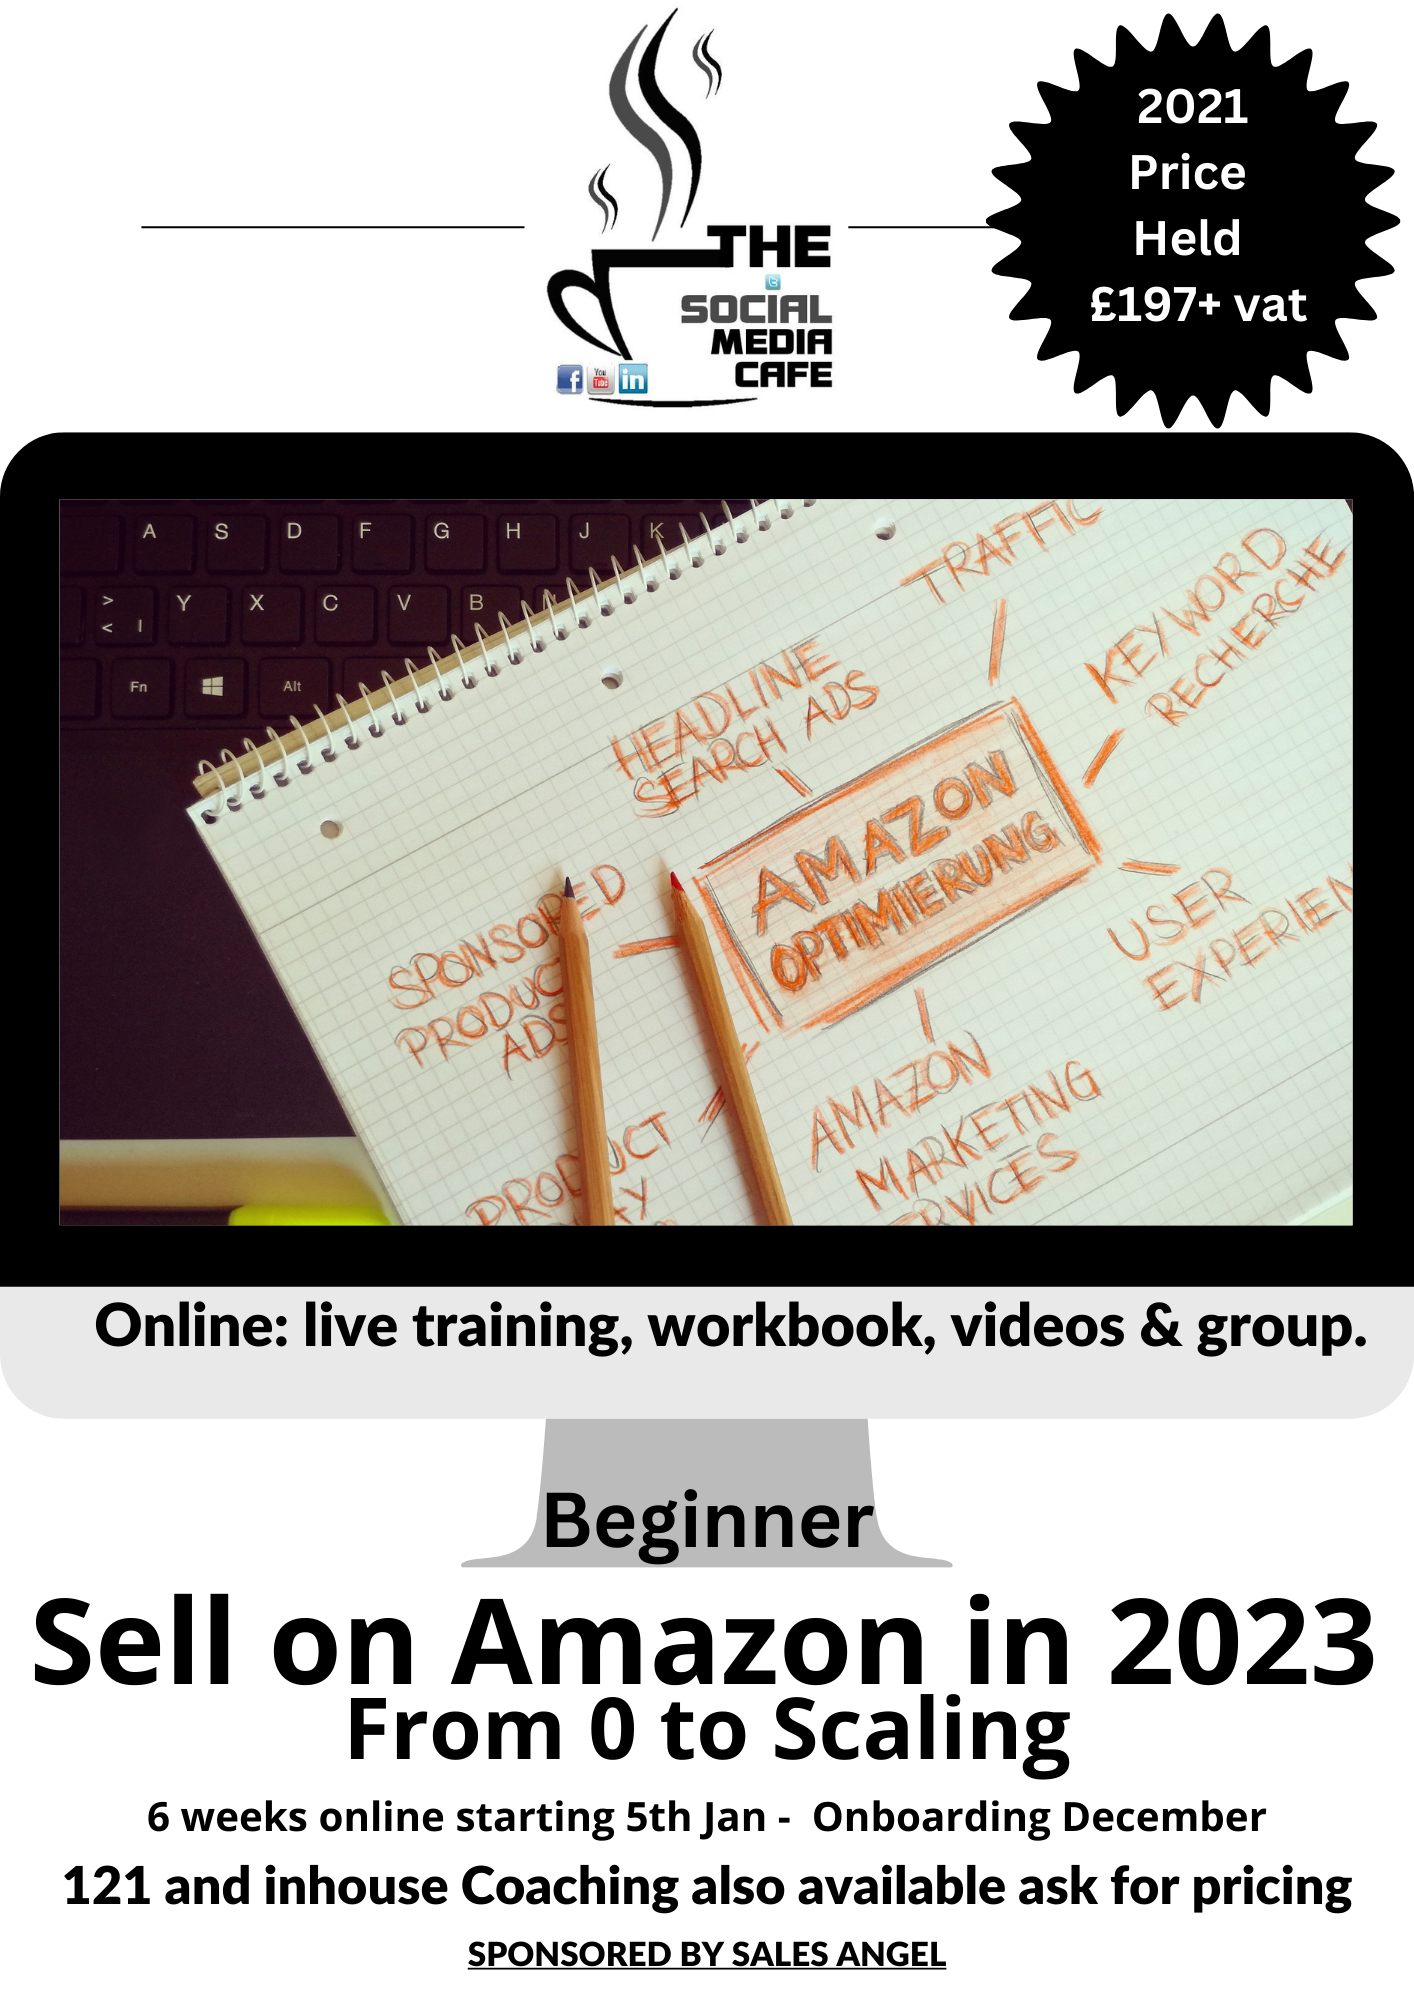 How to sell on Amazon training from The Social Media Cafe in Hertfordshire